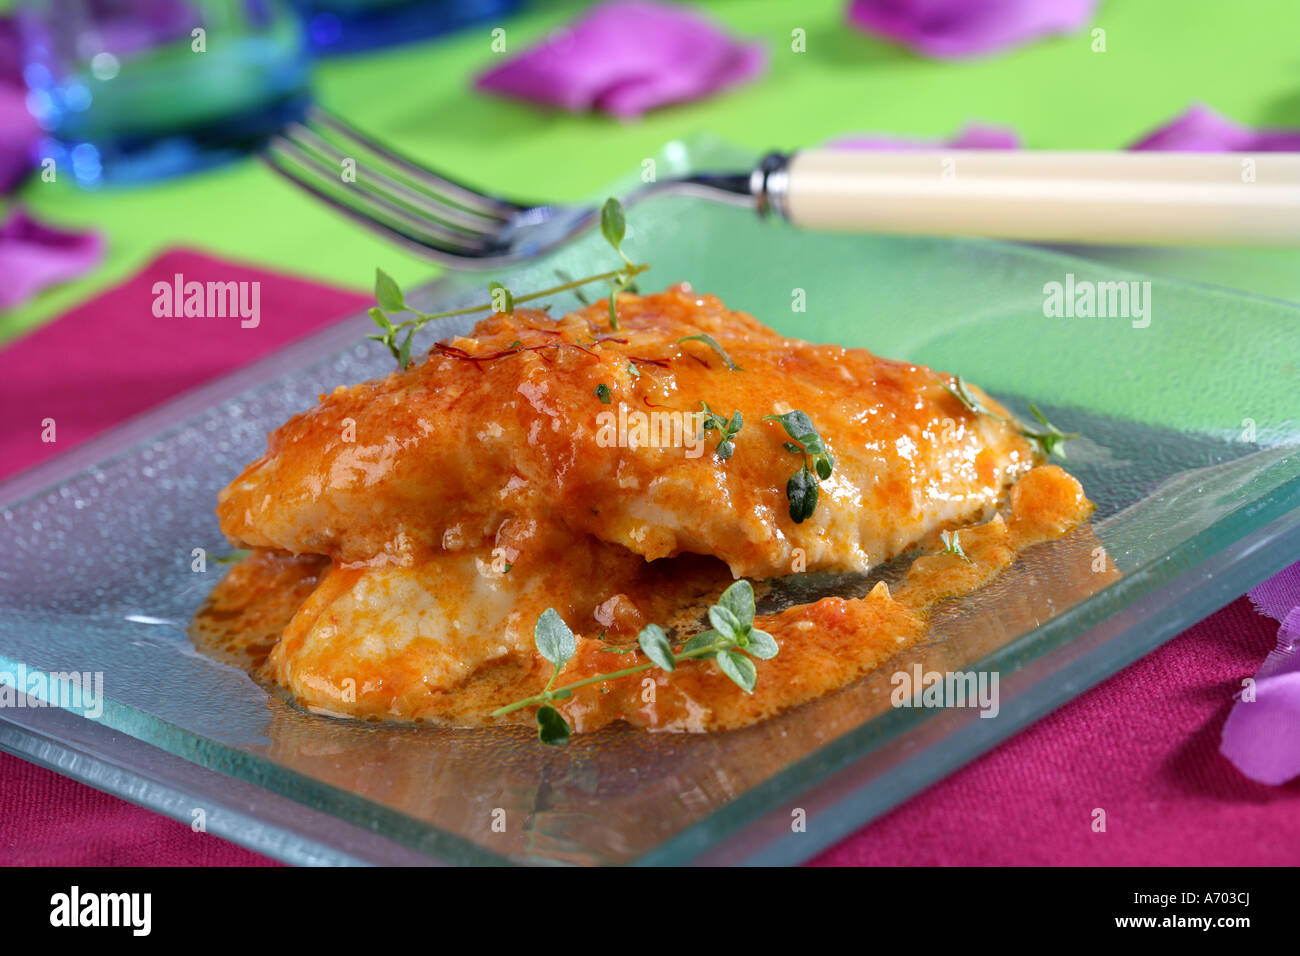 Red scorpion fish with sauce Stock Photo